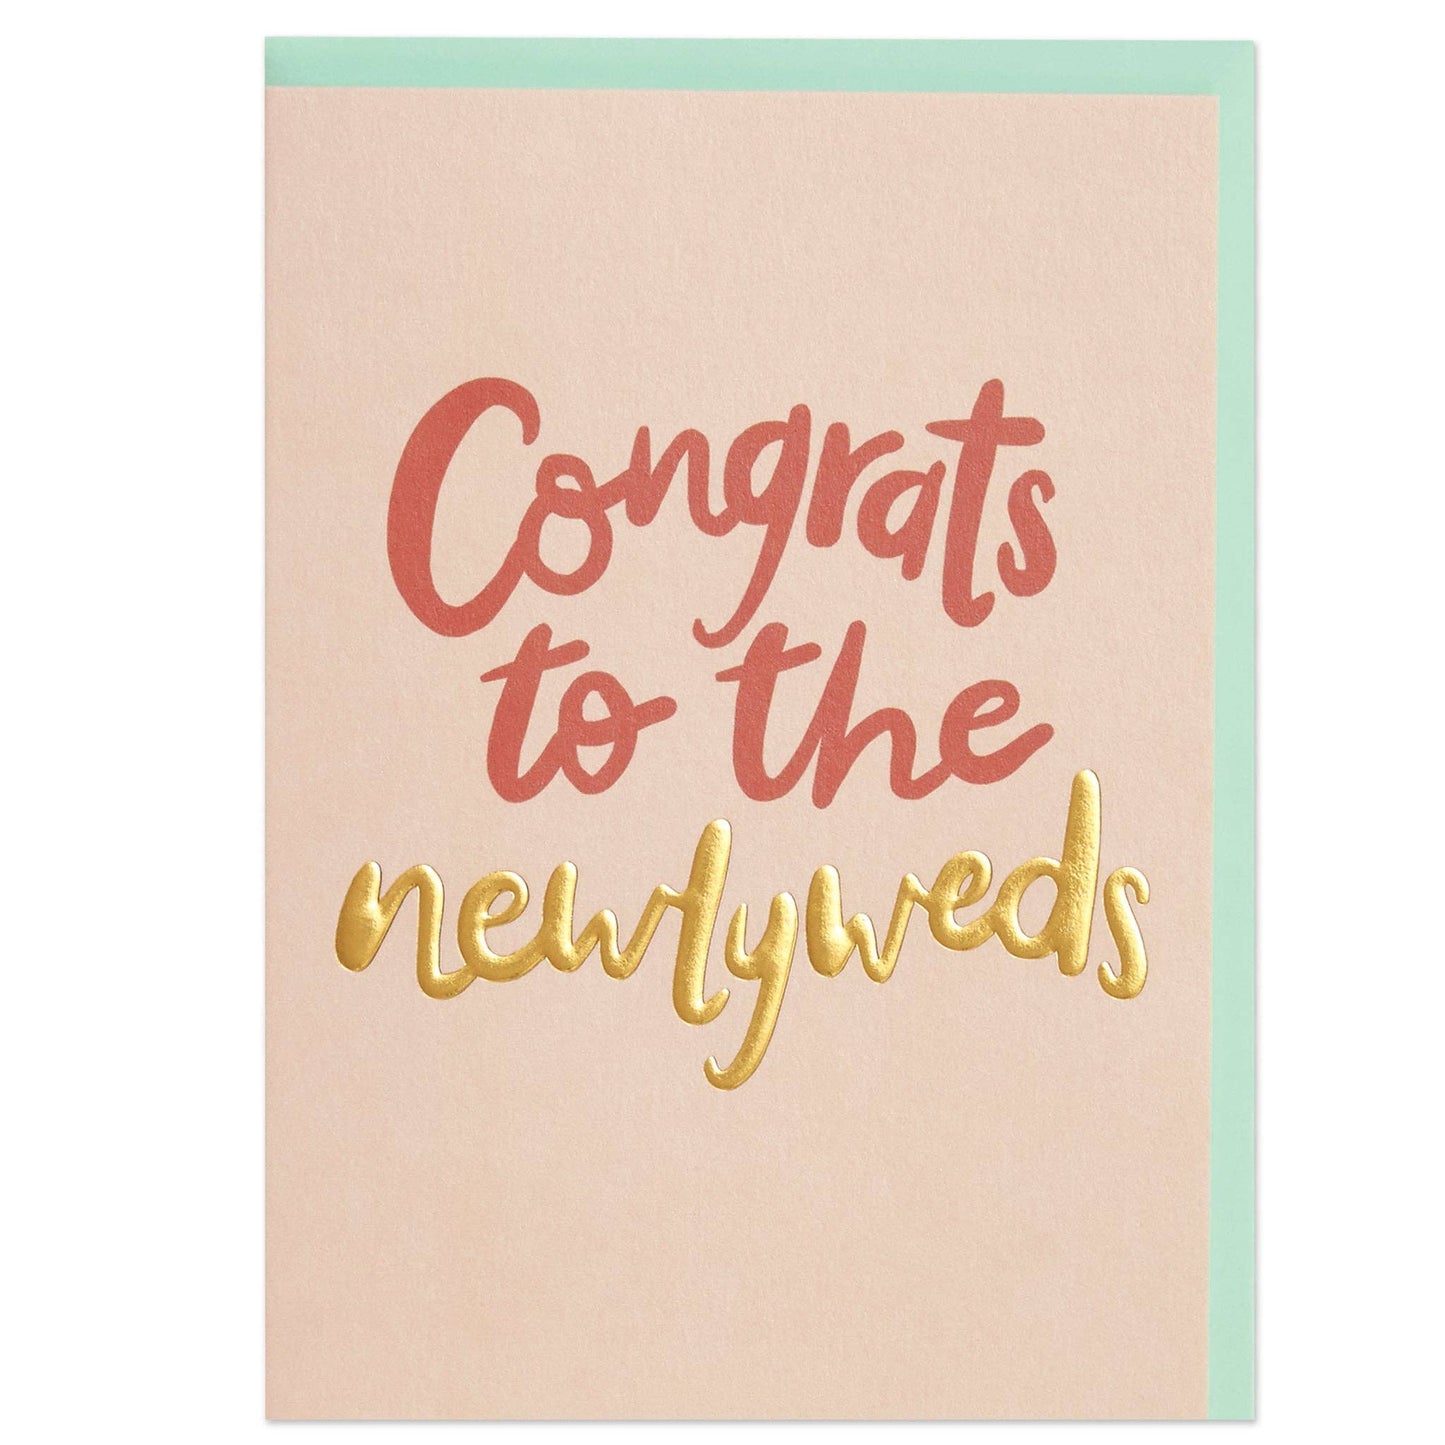 Congrats to the Newlyweds Wedding Card